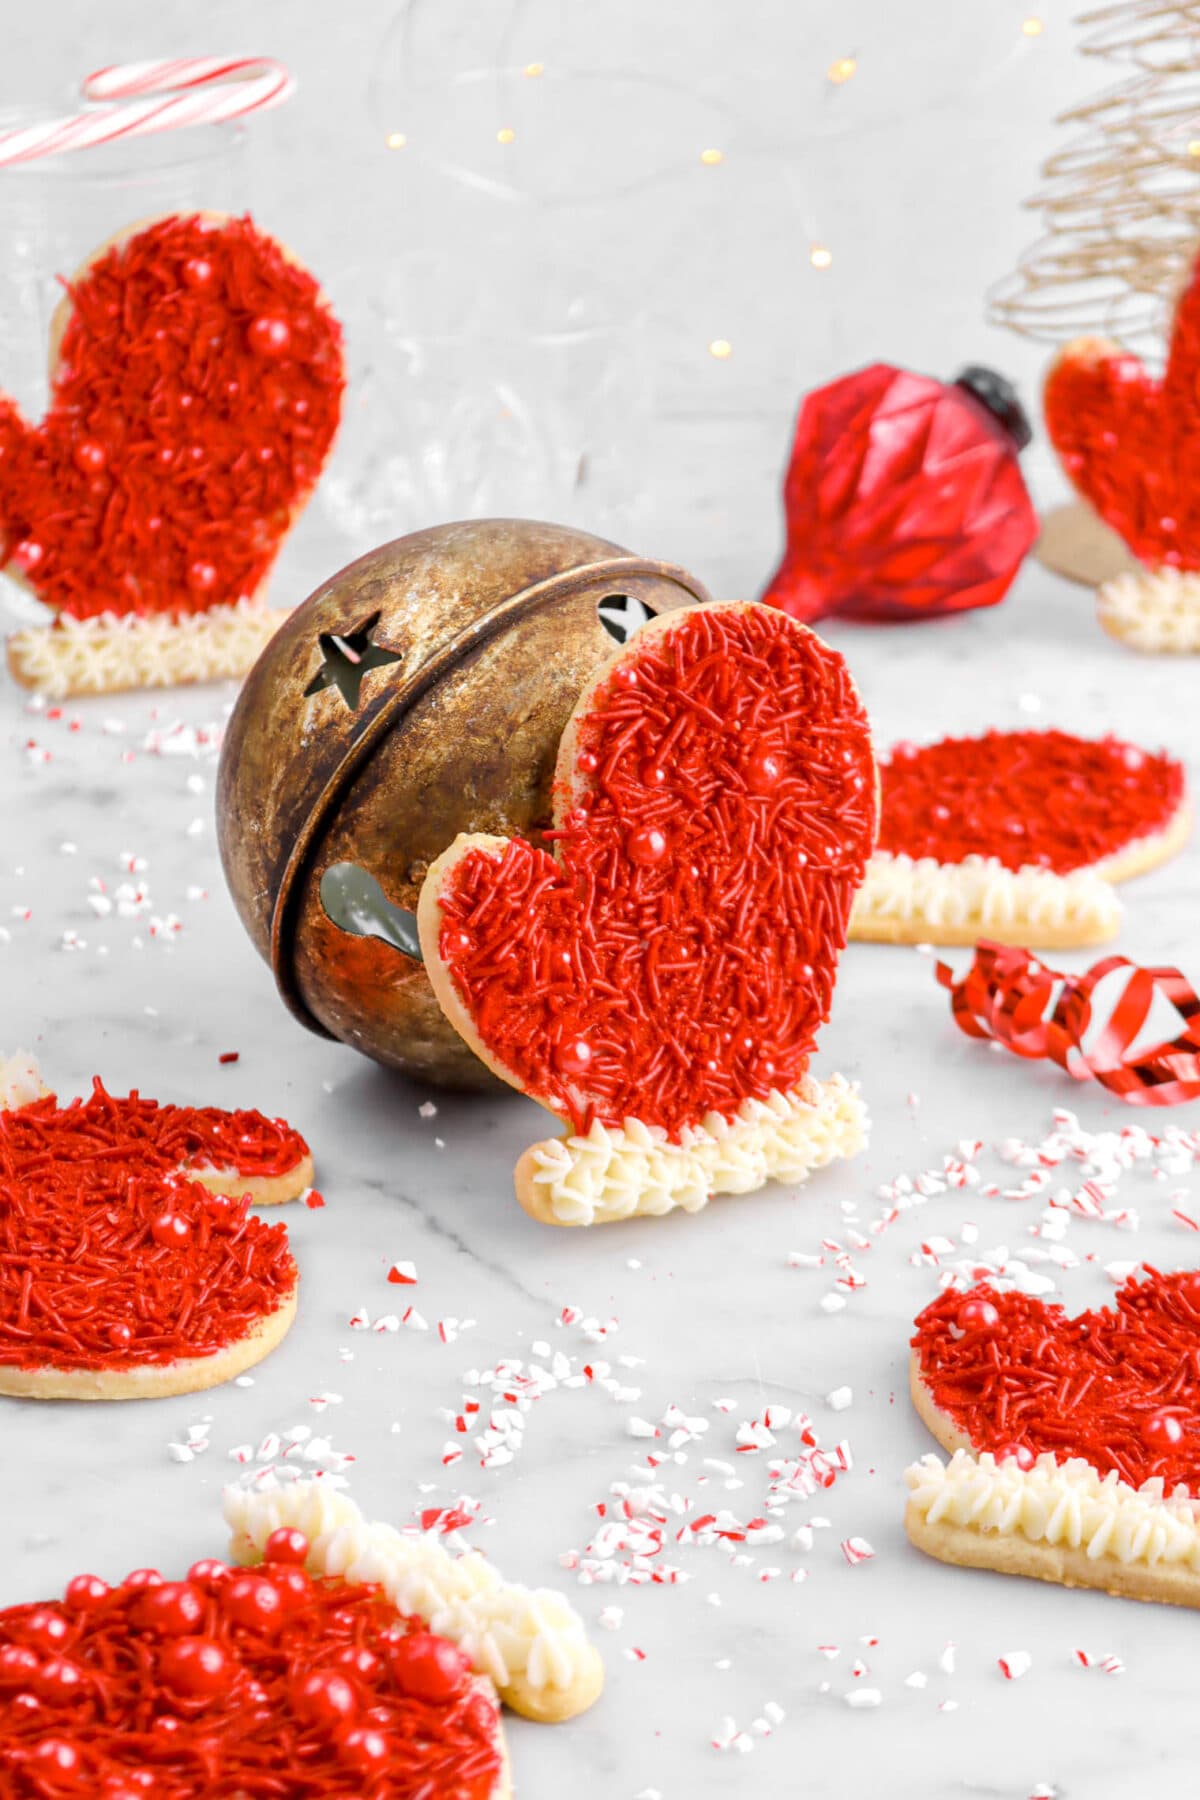 seven glove shaped cookies, with one leaning against a red bell in the middle on marble surface with crushed peppermint around.